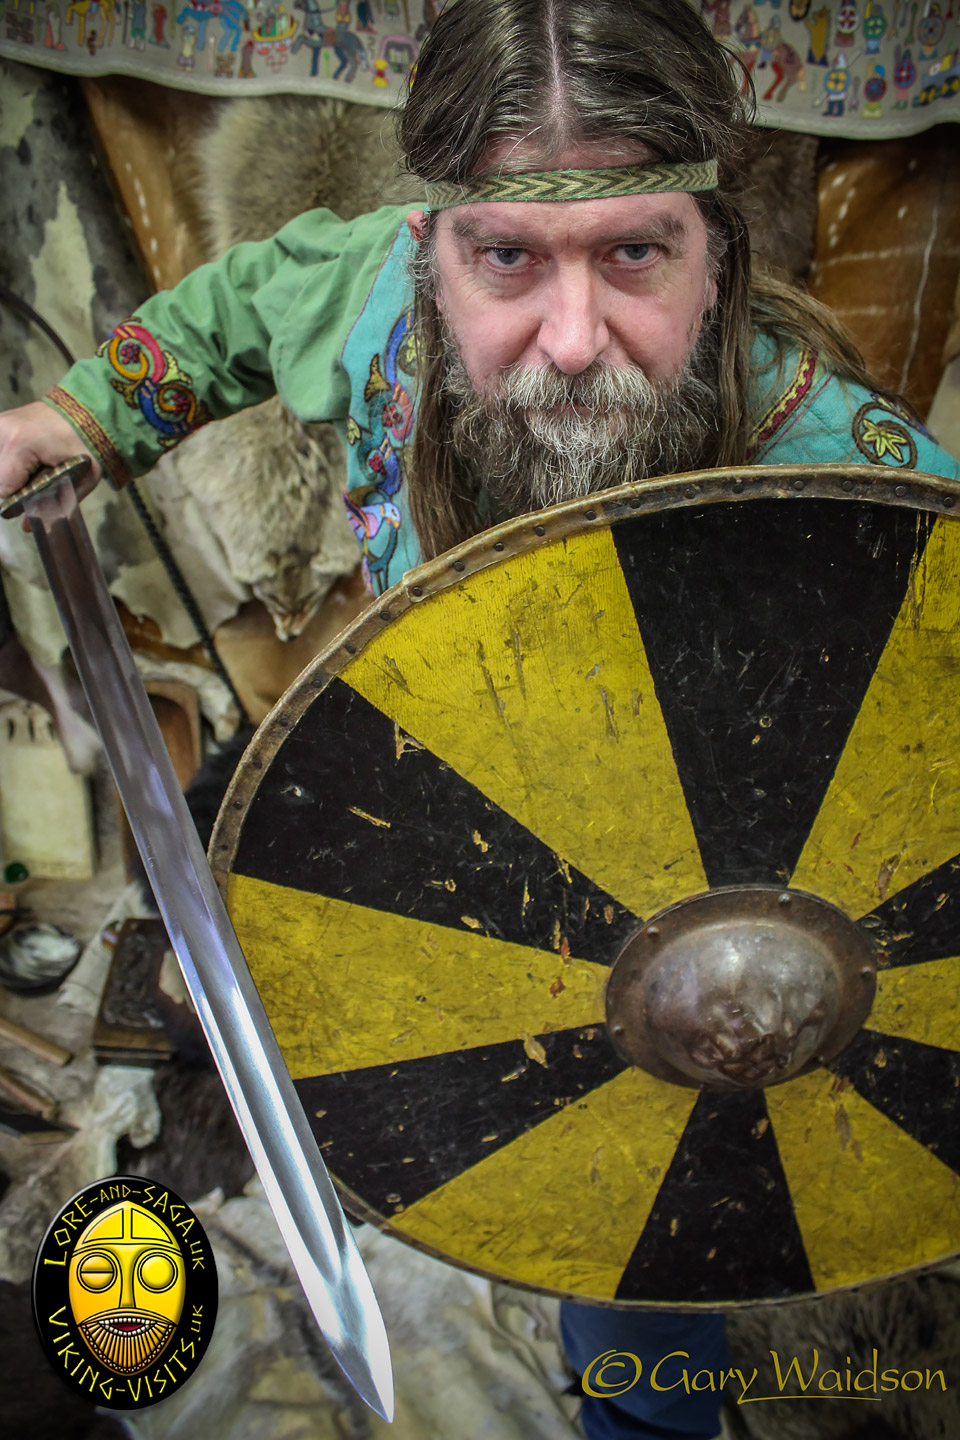 Don't annoy the Viking! - Image copyrighted © Gary Waidson. All rights reserved.